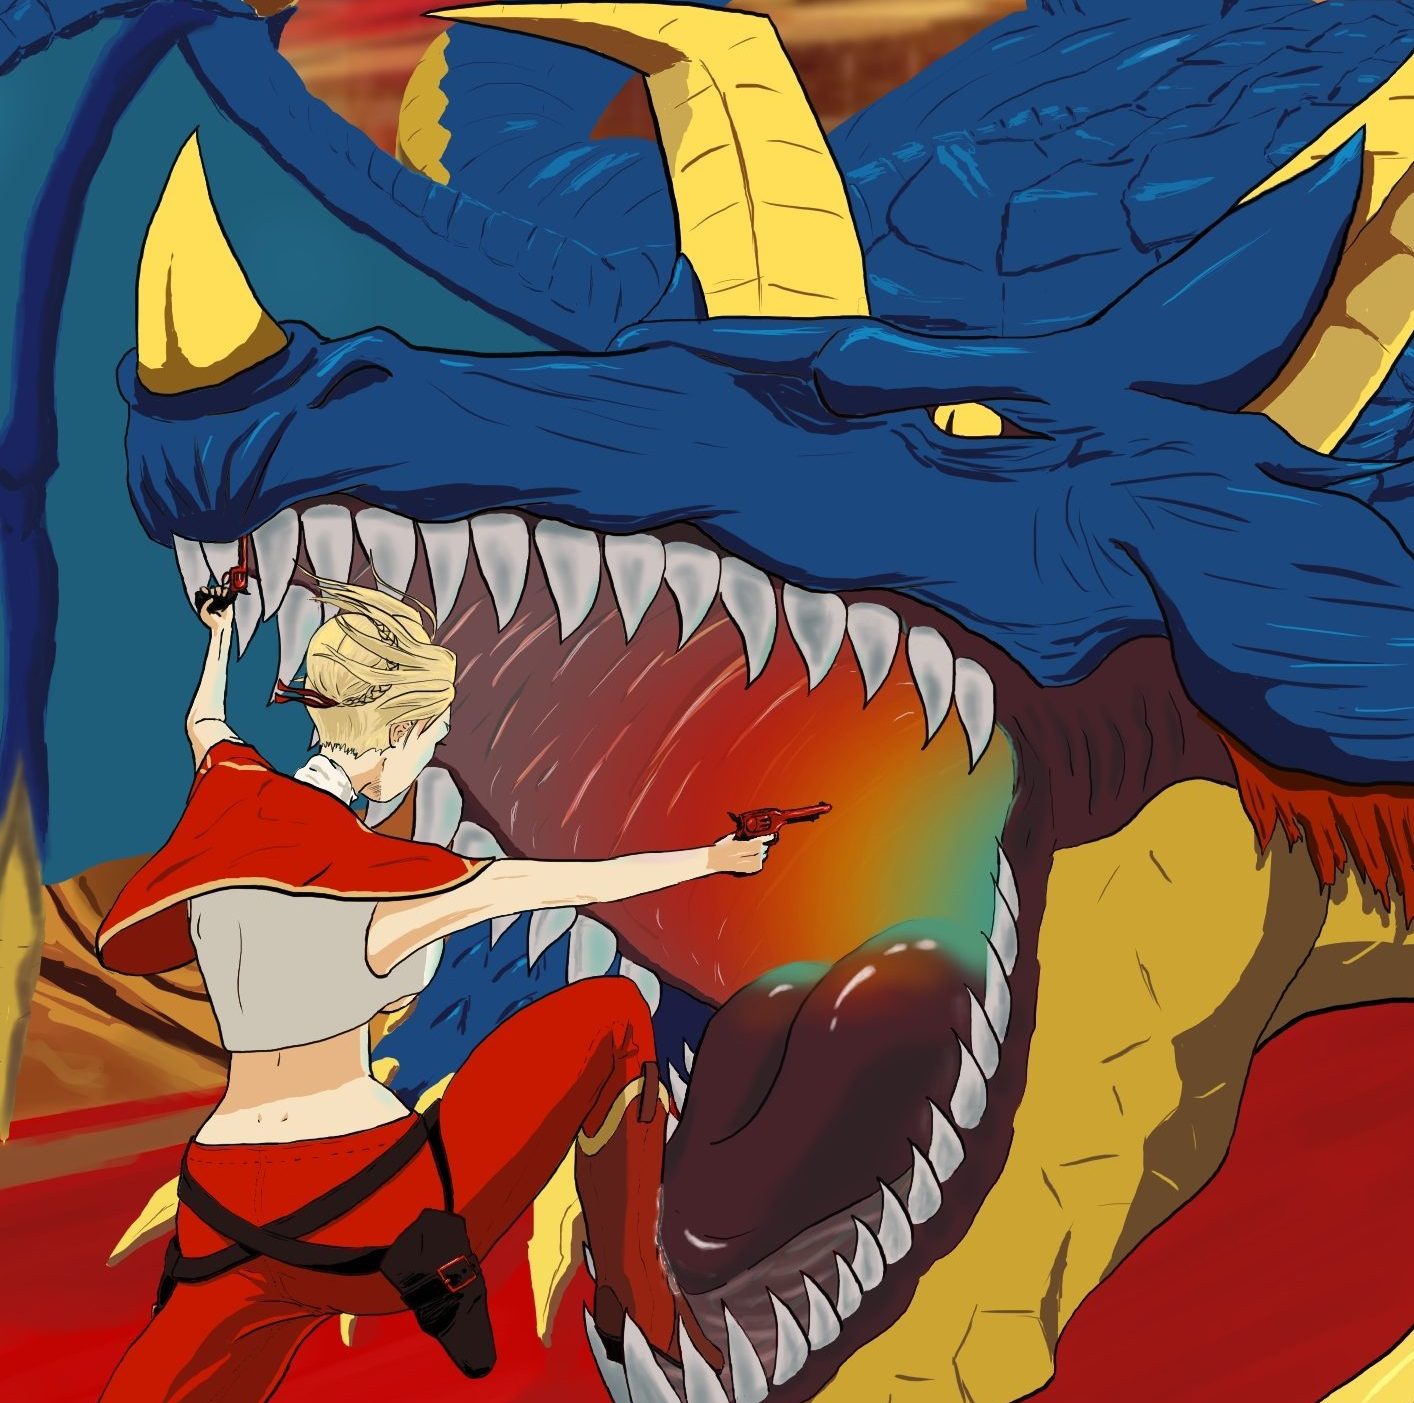 Nero shooting into the mouth of a dragon.